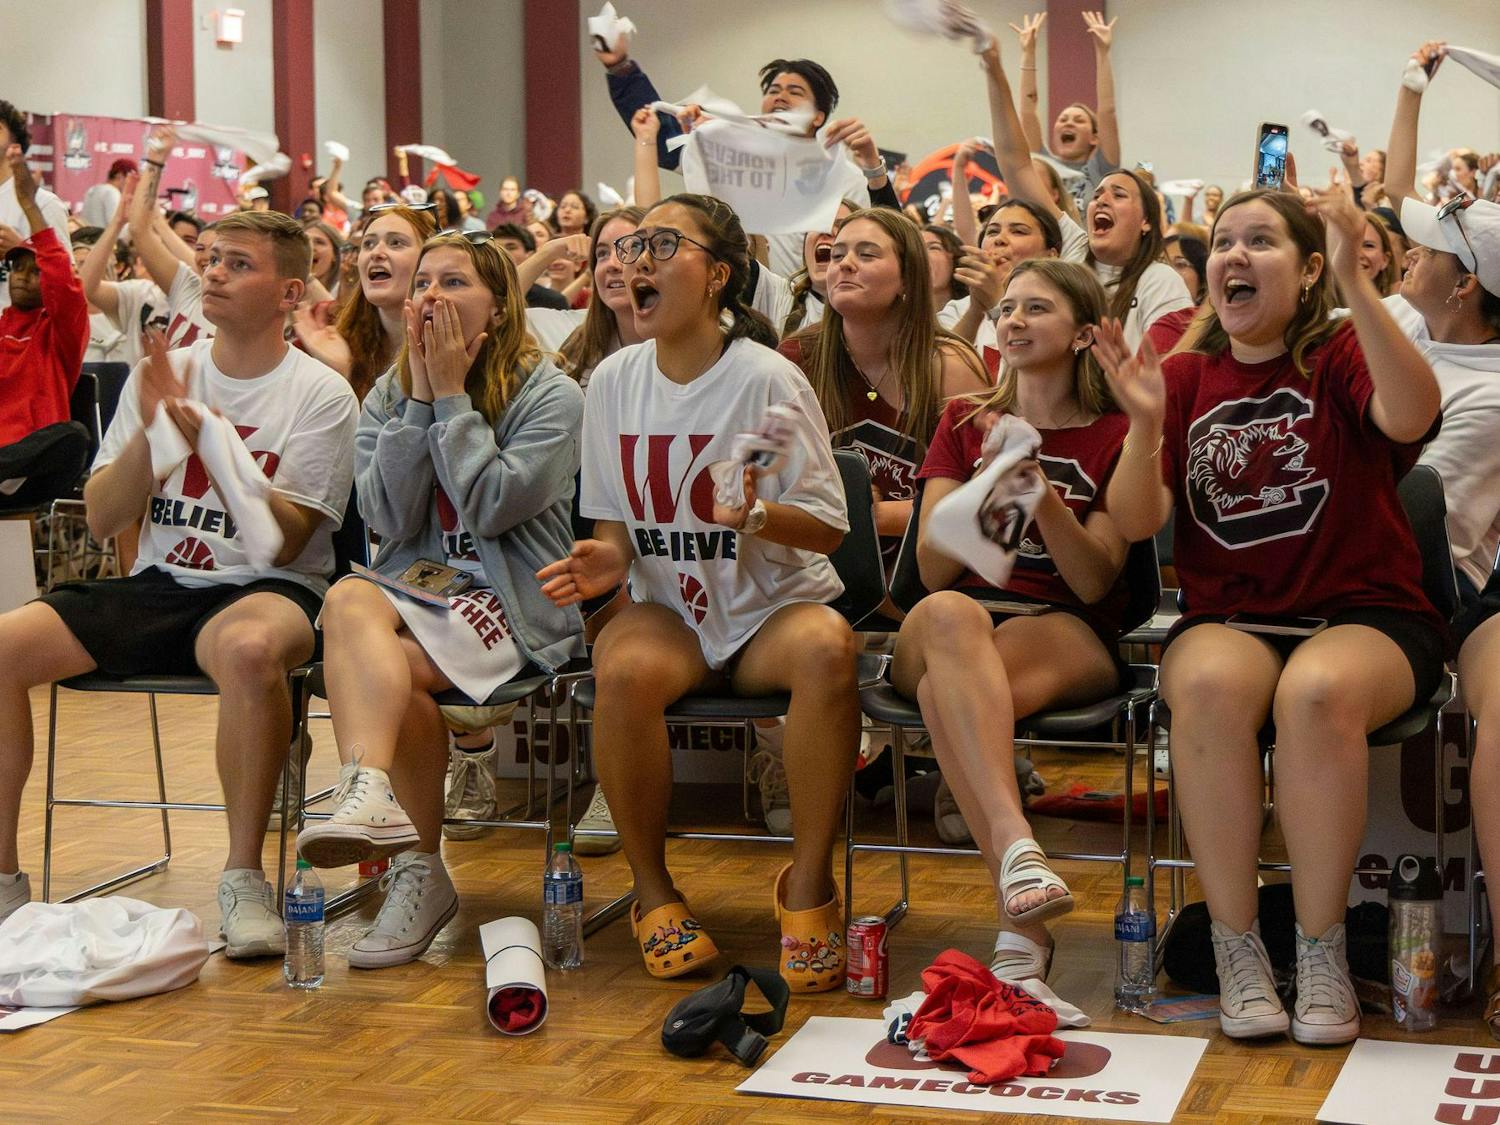 University of South Carolina students gather in the Russell House Student Union to cheer on the Gamecock women's basketball team as it competes in the final round of the NCAA Women's Tournament against Iowa on April 7, 2024. The Gamecocks capped off an undefeated season with an 87-75 victory over the Hawkeyes.